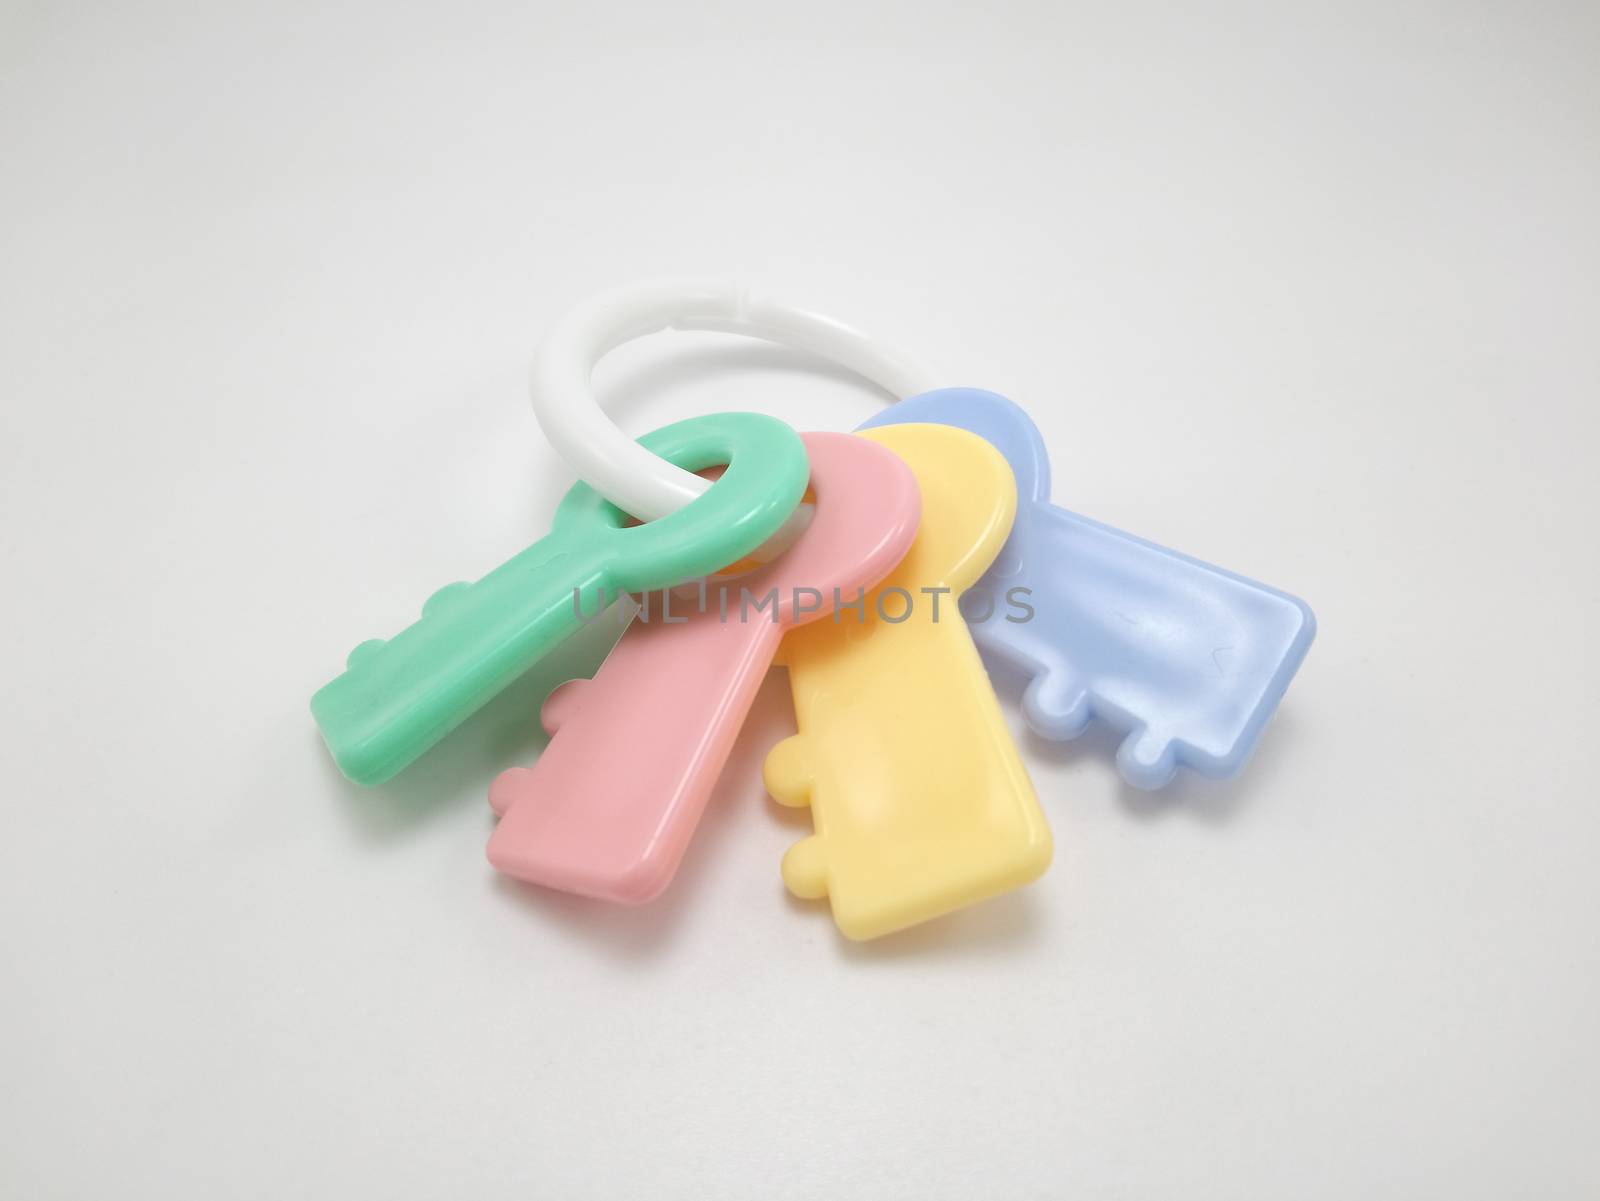 Colorful pastel color plastic keys toy for baby use to play